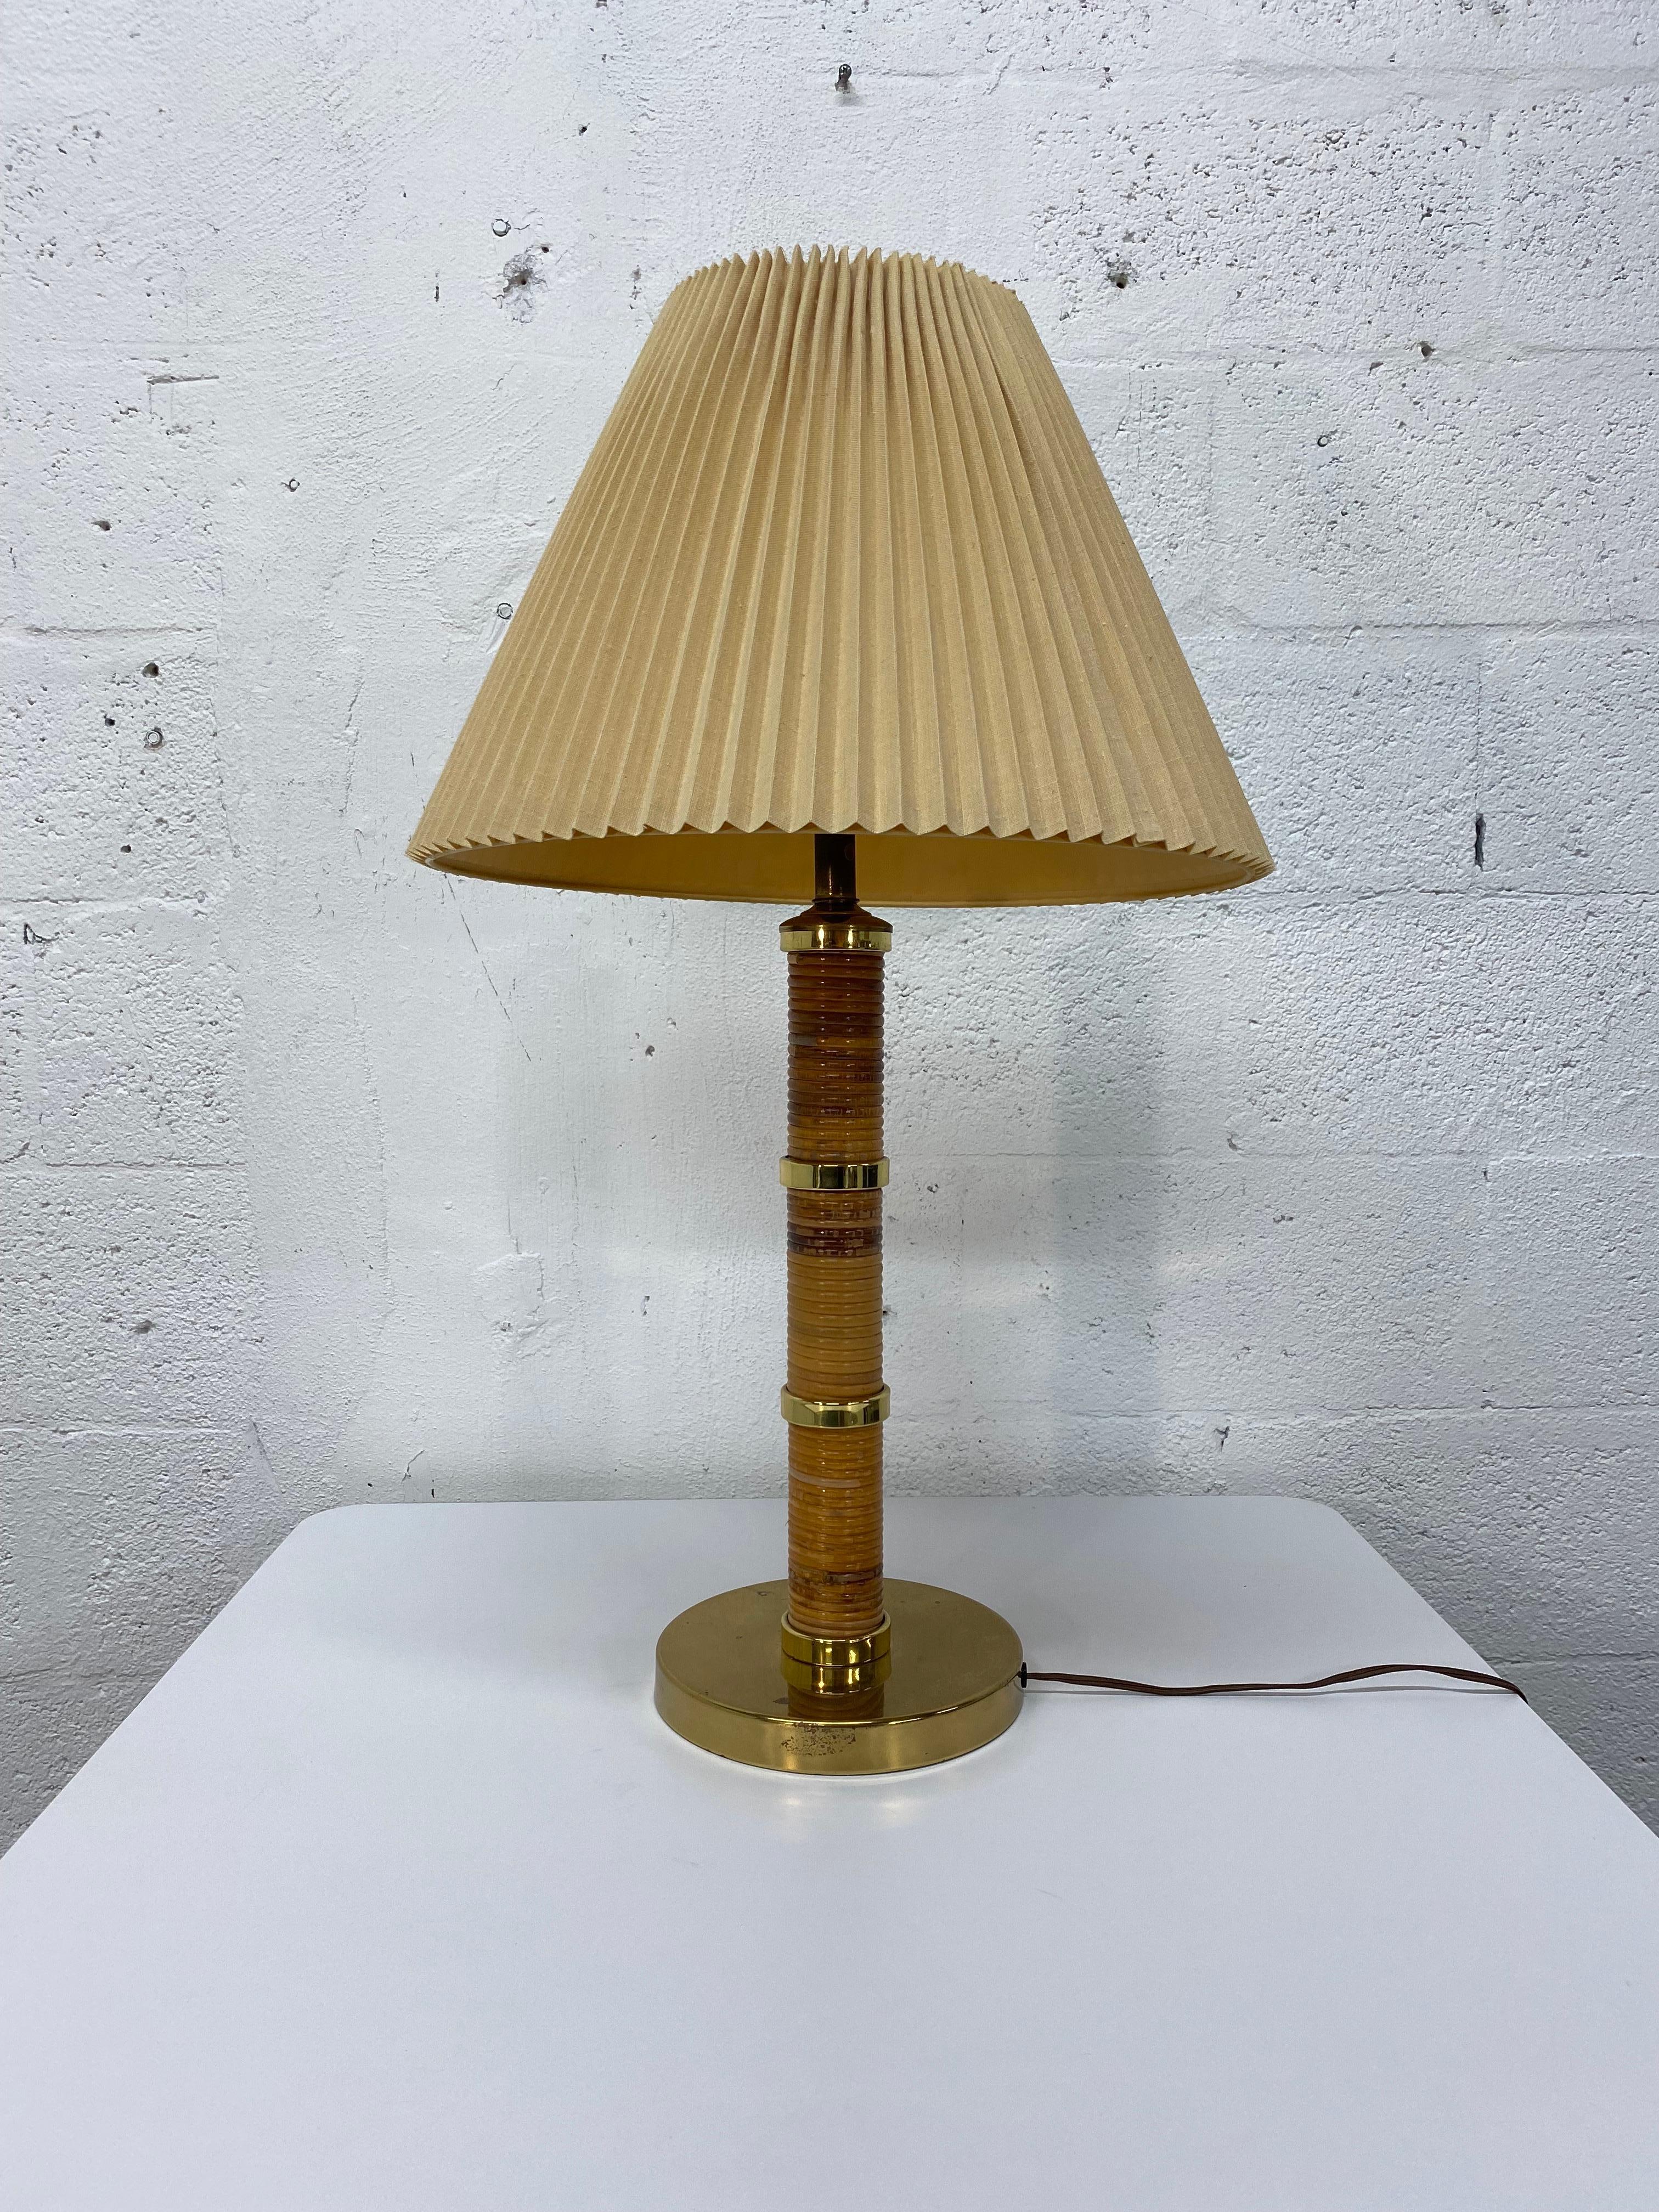 Original 1970s brass table lamp wrapped in rattan with a beige ribbed lamp shade.